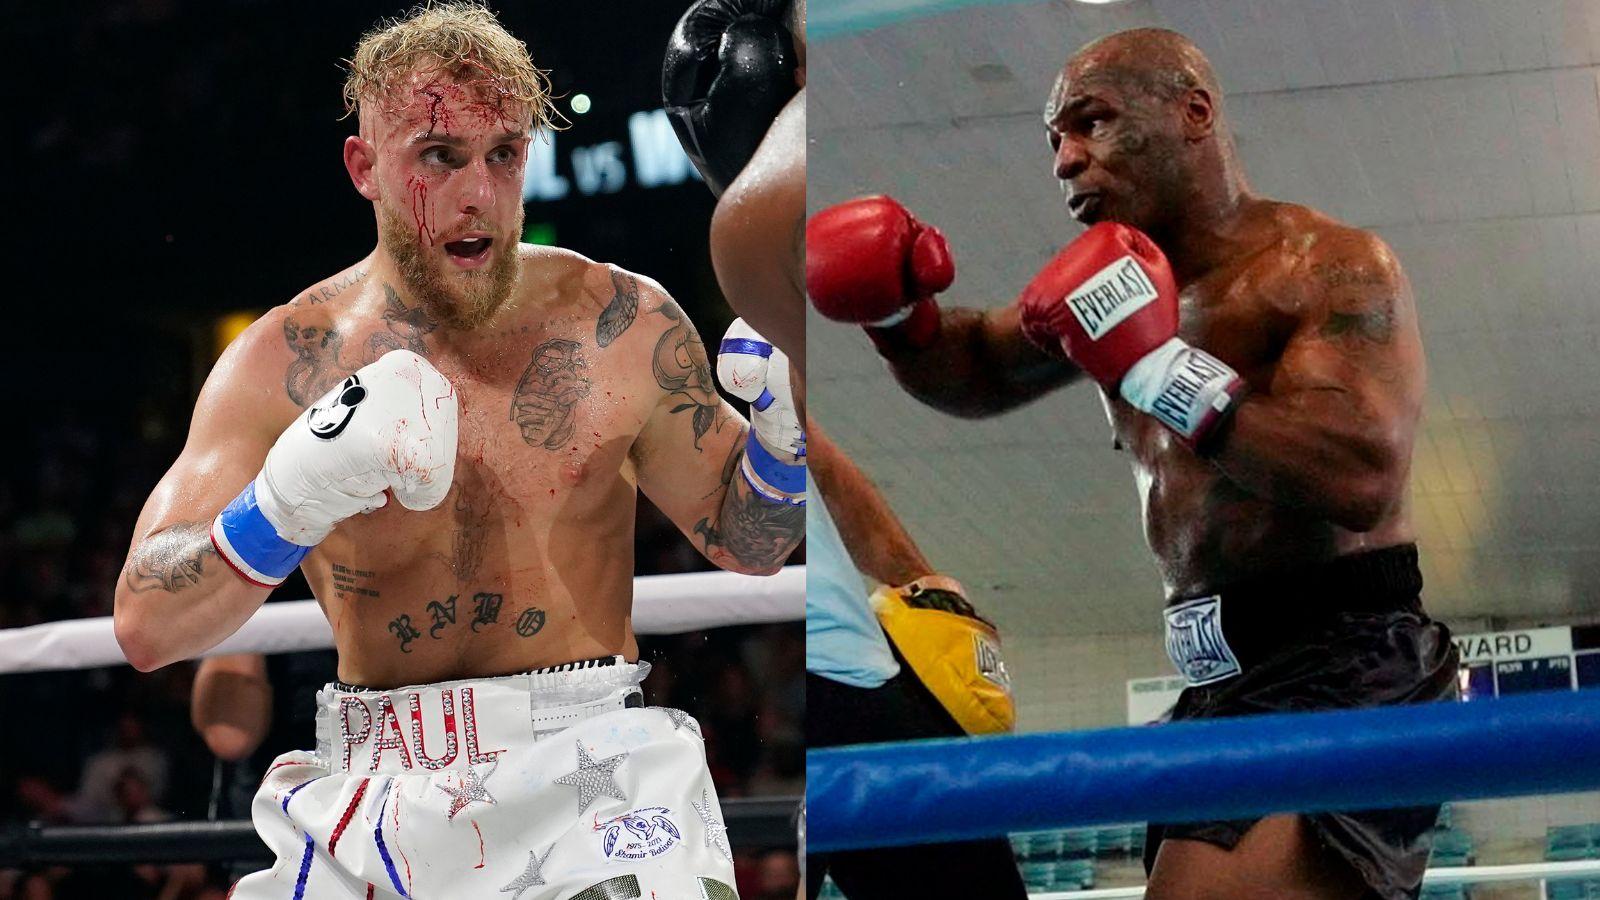 Jake Paul (left), and Mike Tyson (right) both in the boxing ring on separate occasions.